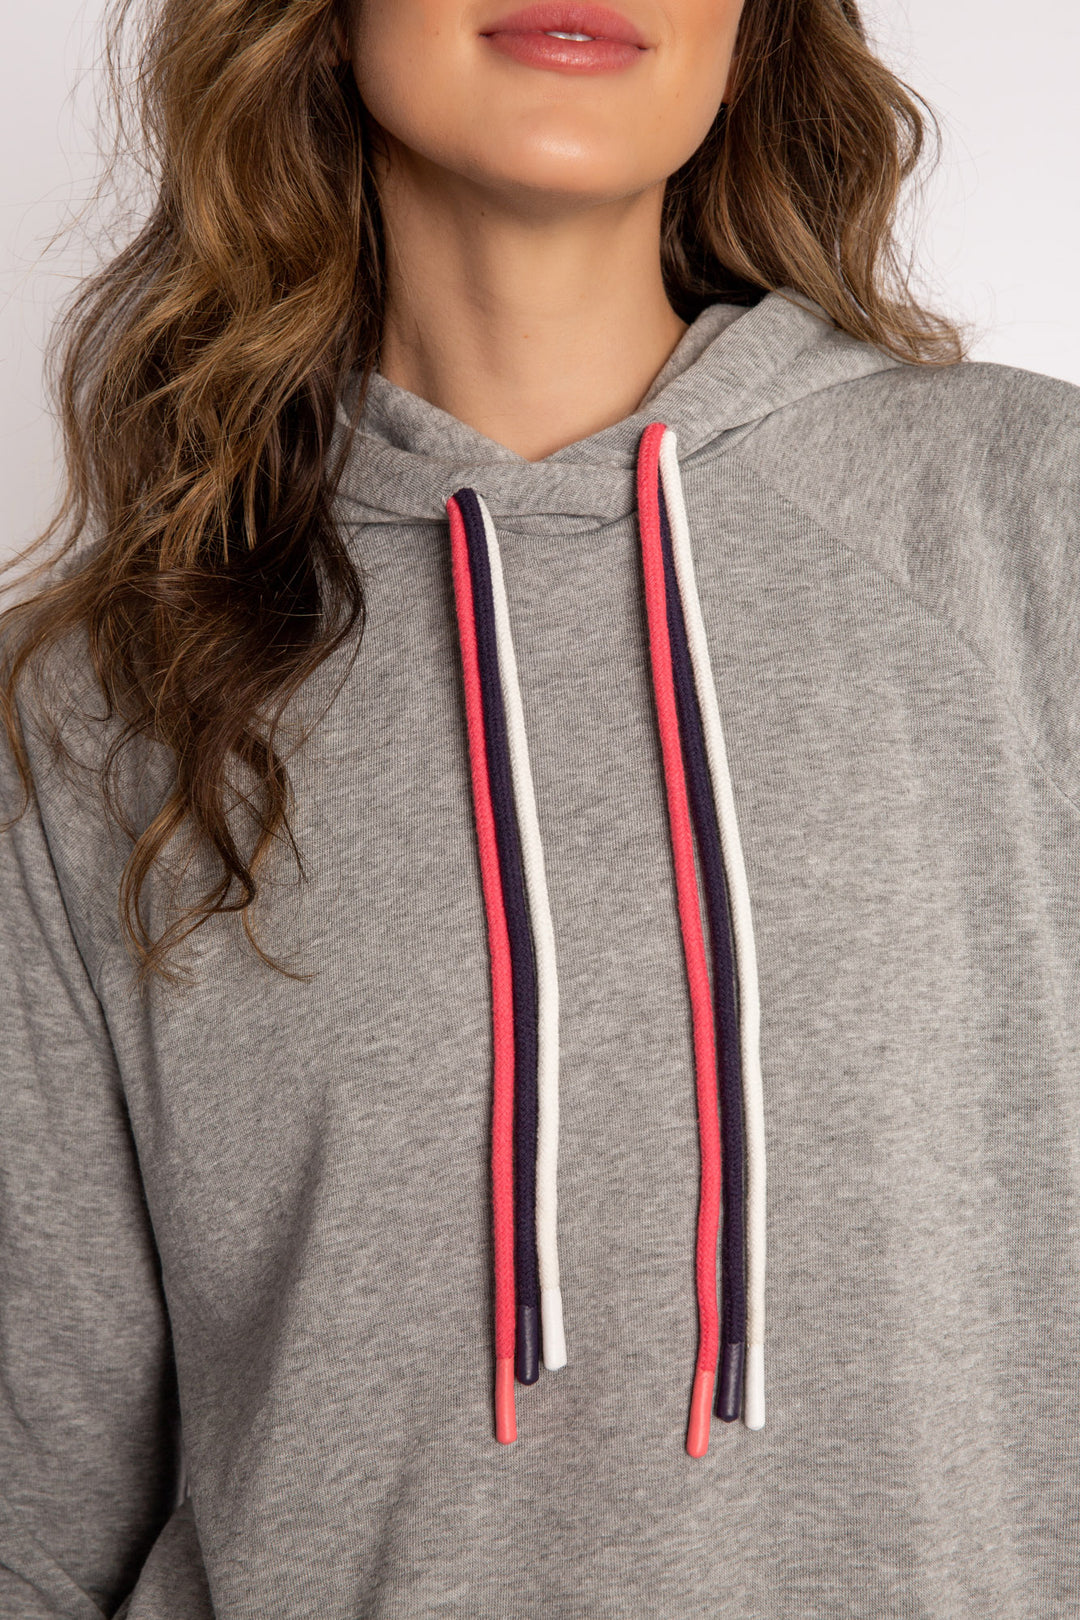 Heather grey hoodie with multi-colored drawcord. (7125189623908)